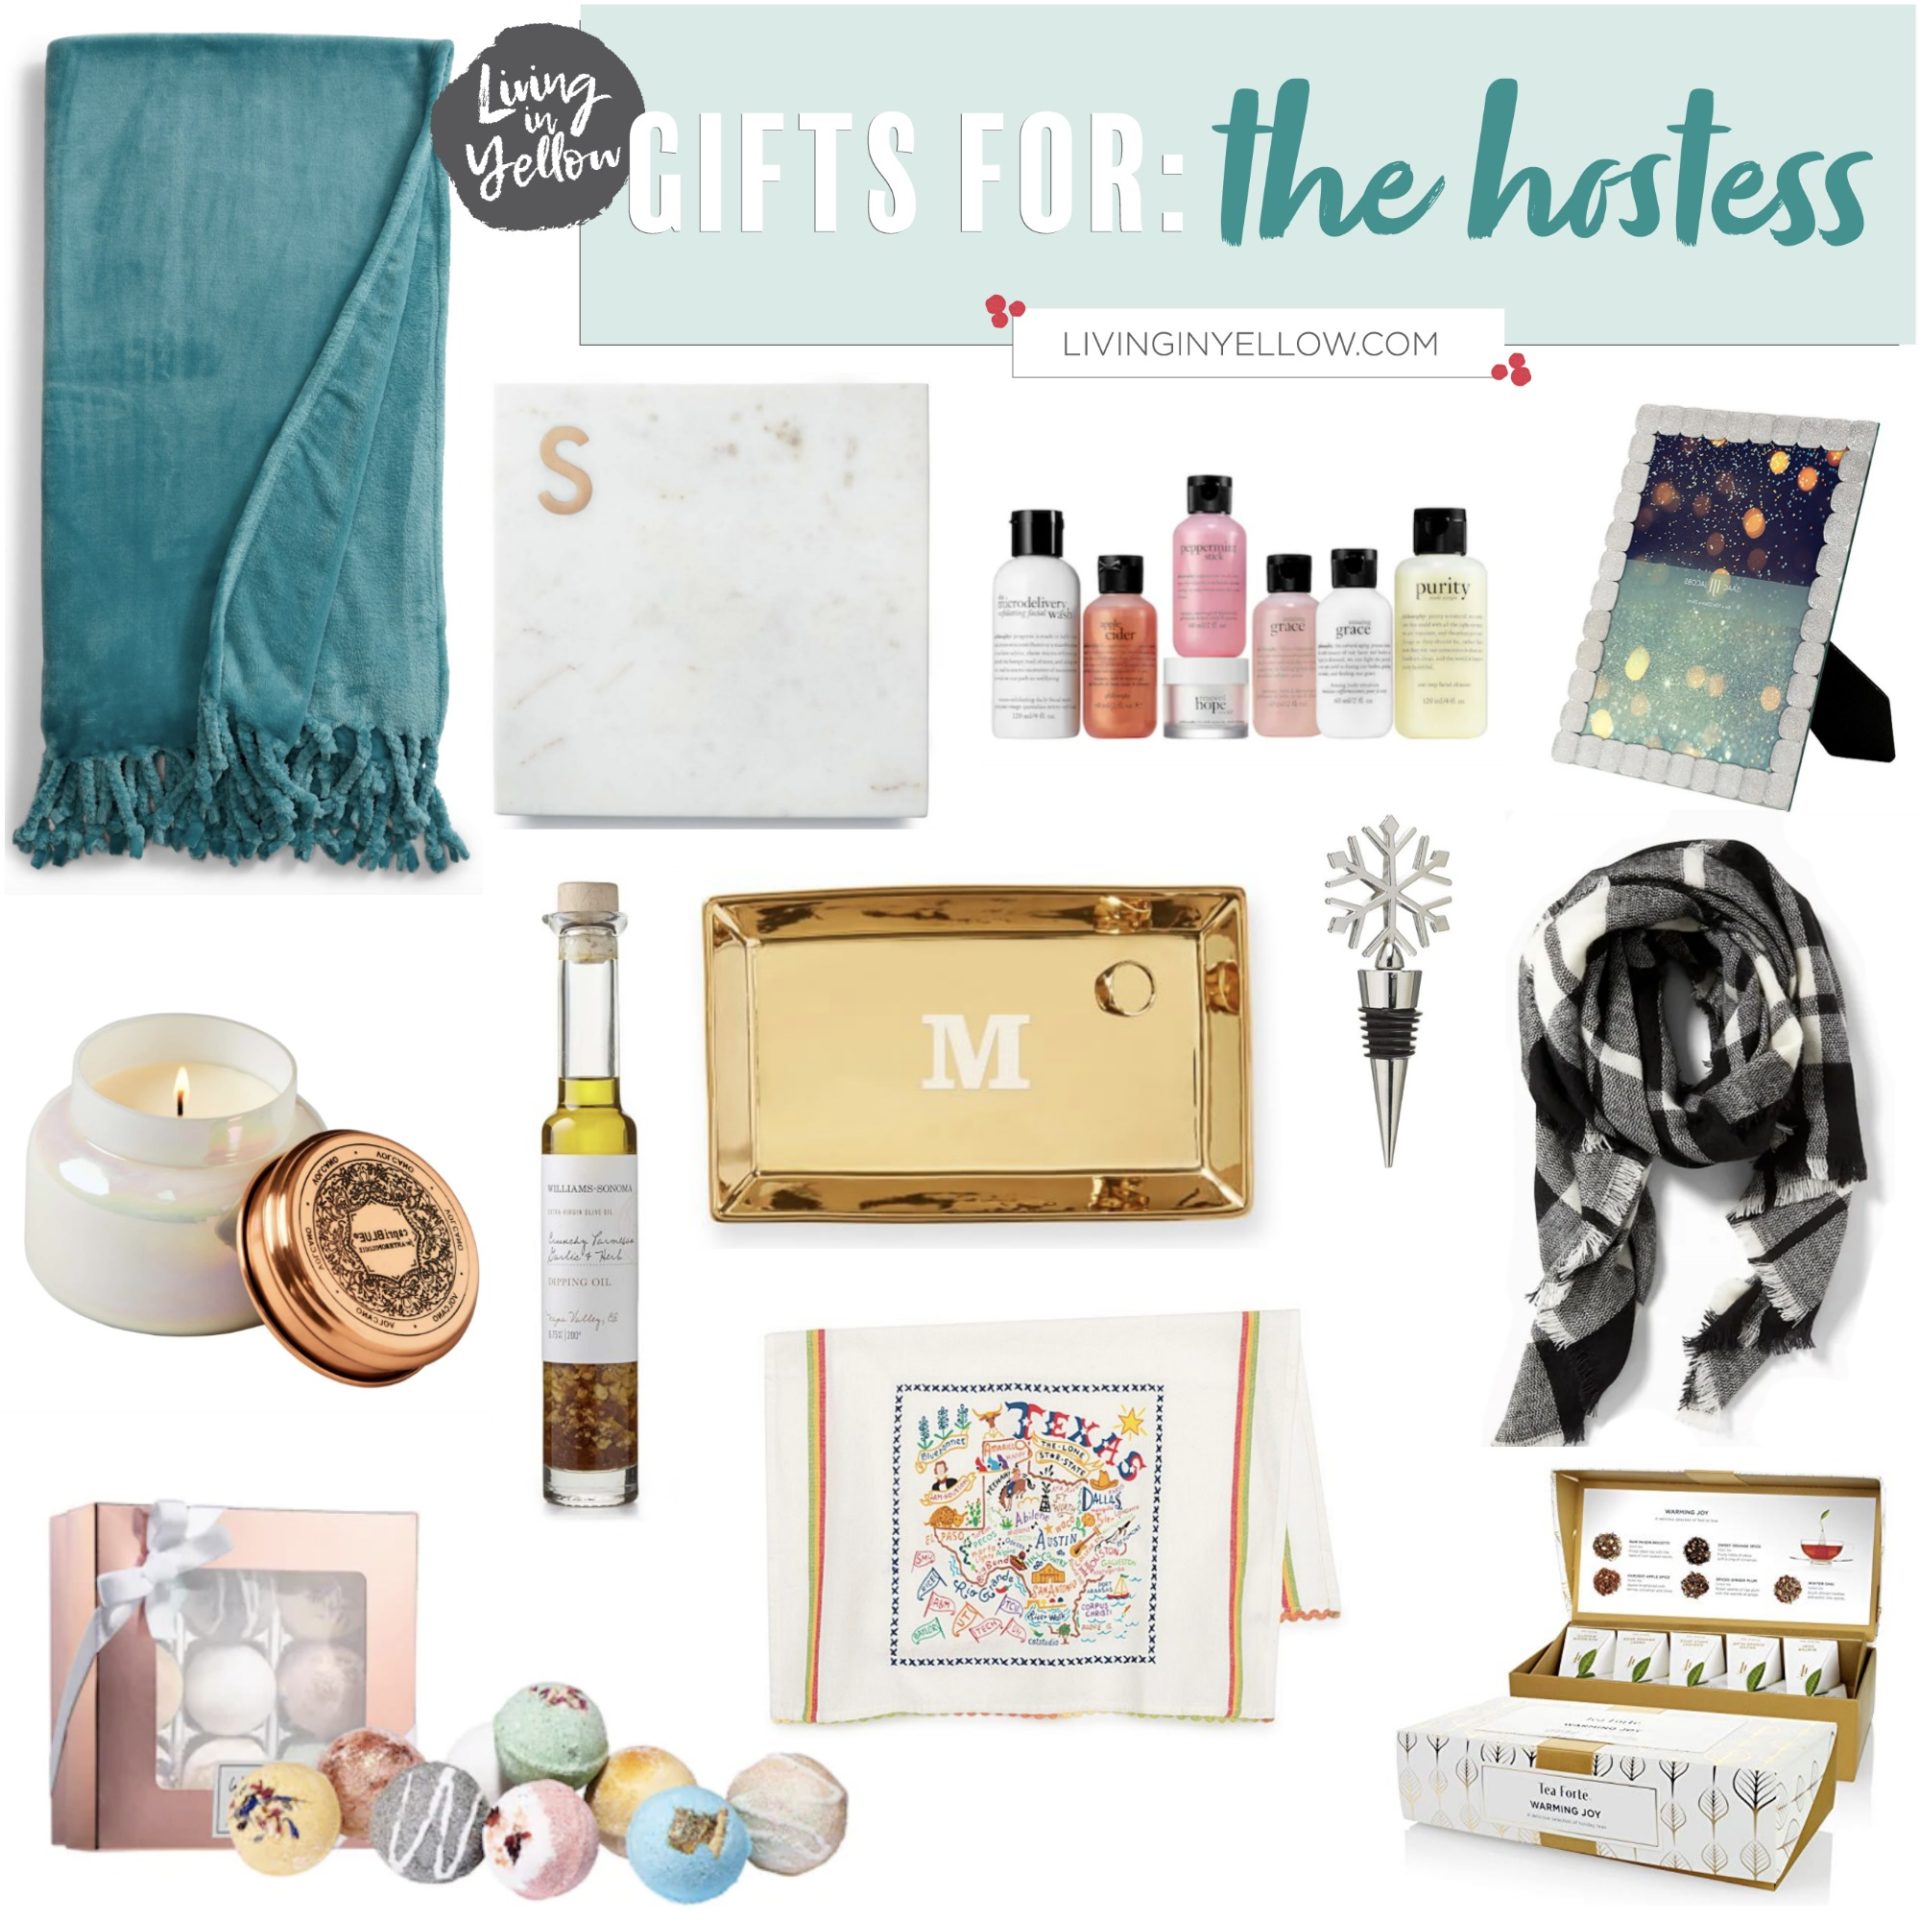 Gift Guide: Hostess Gift Ideas They'll Actually Want